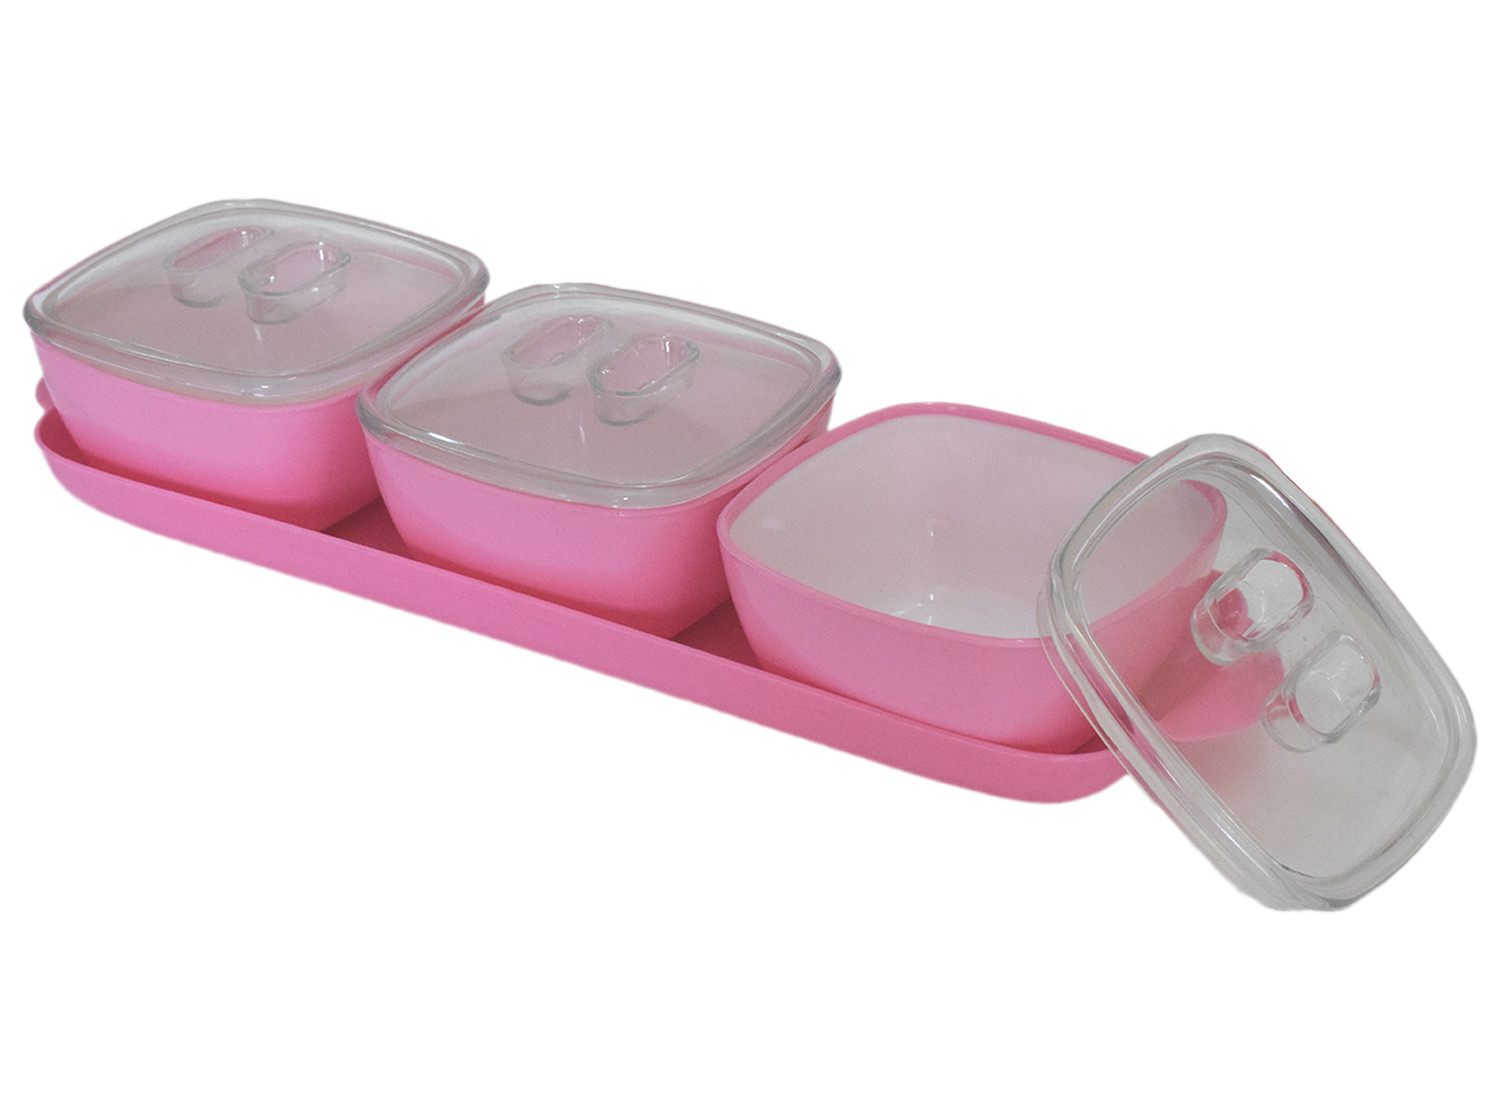 Kuber Industries Plastic 3 Bowls & 1 Tray Set For Serving & Store Dry Fruits, candies, Snacks With Silicon Rubberized Ring Lid (Pink)